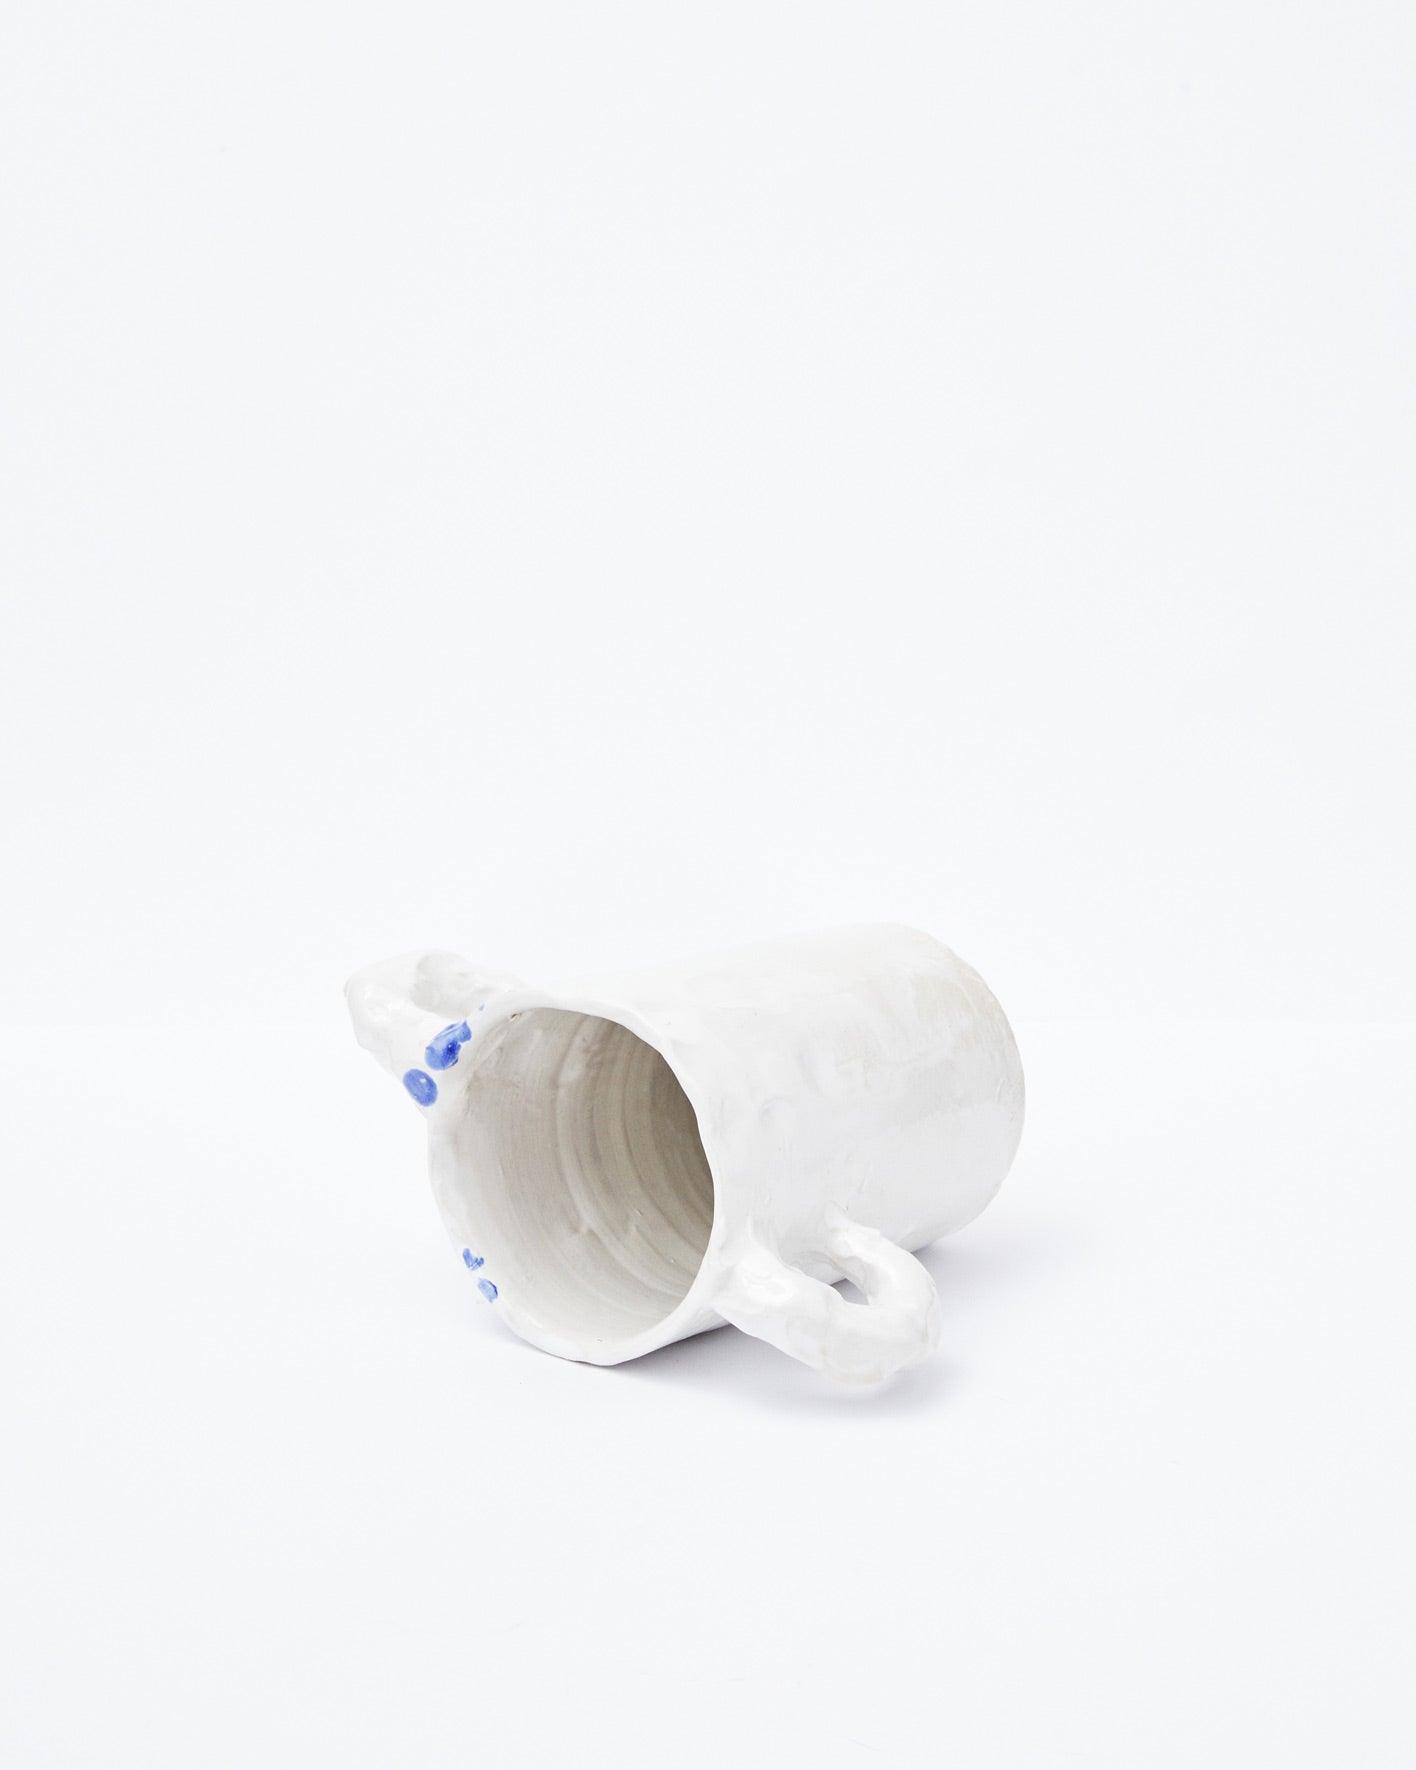 White modern ceramic vase with two handles diagonally positioned on a white background